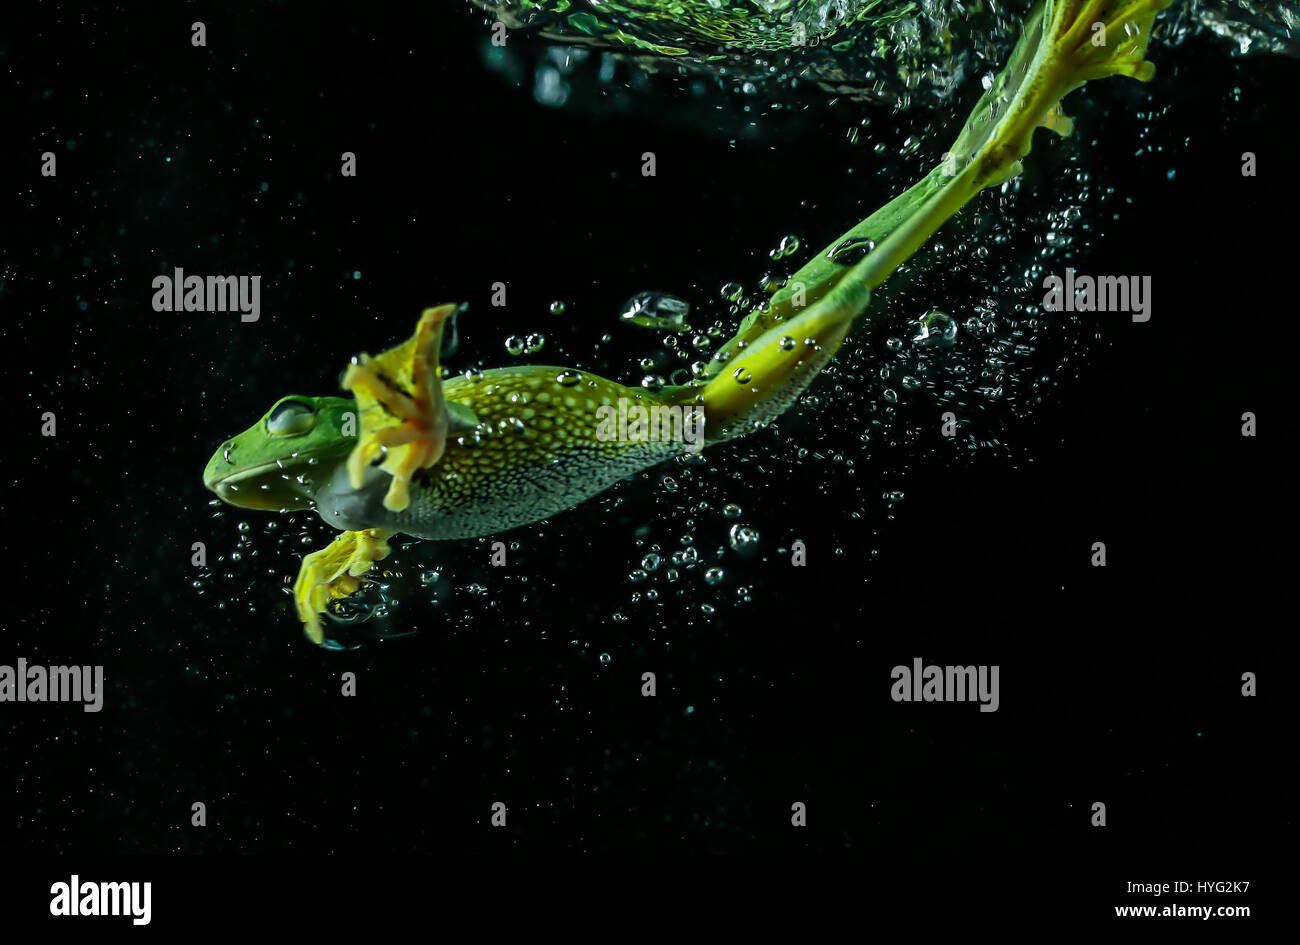 JAKARTA, INDONESIA: SPECTACULAR pictures of a frog diving and swimming underwater show just how graceful these otherwise ungainly creatures can be. The amphibious creature can be seen plopping into the water and swimming in this series of pictures taken by a nature loving industrial manager. The images were taken by Tanto Yensen from Jakarta, who coaxed the wild Javan Gliding Tree frog into a tank of water to create the stunning shots. Stock Photo